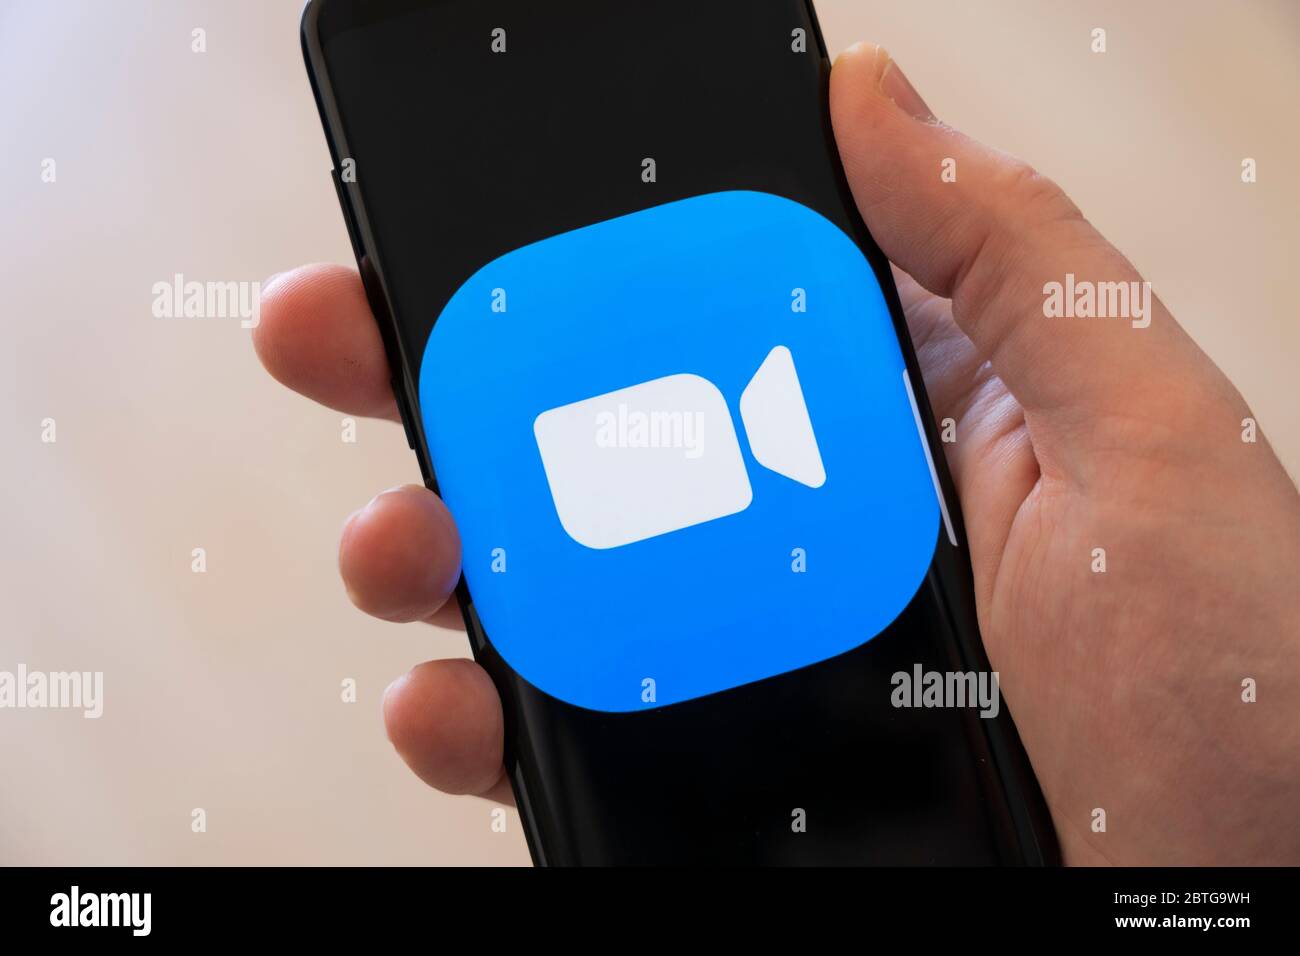 A man's hand (man is 39) holding a smartphone displaying a large logo for the video calling app Zoom Stock Photo